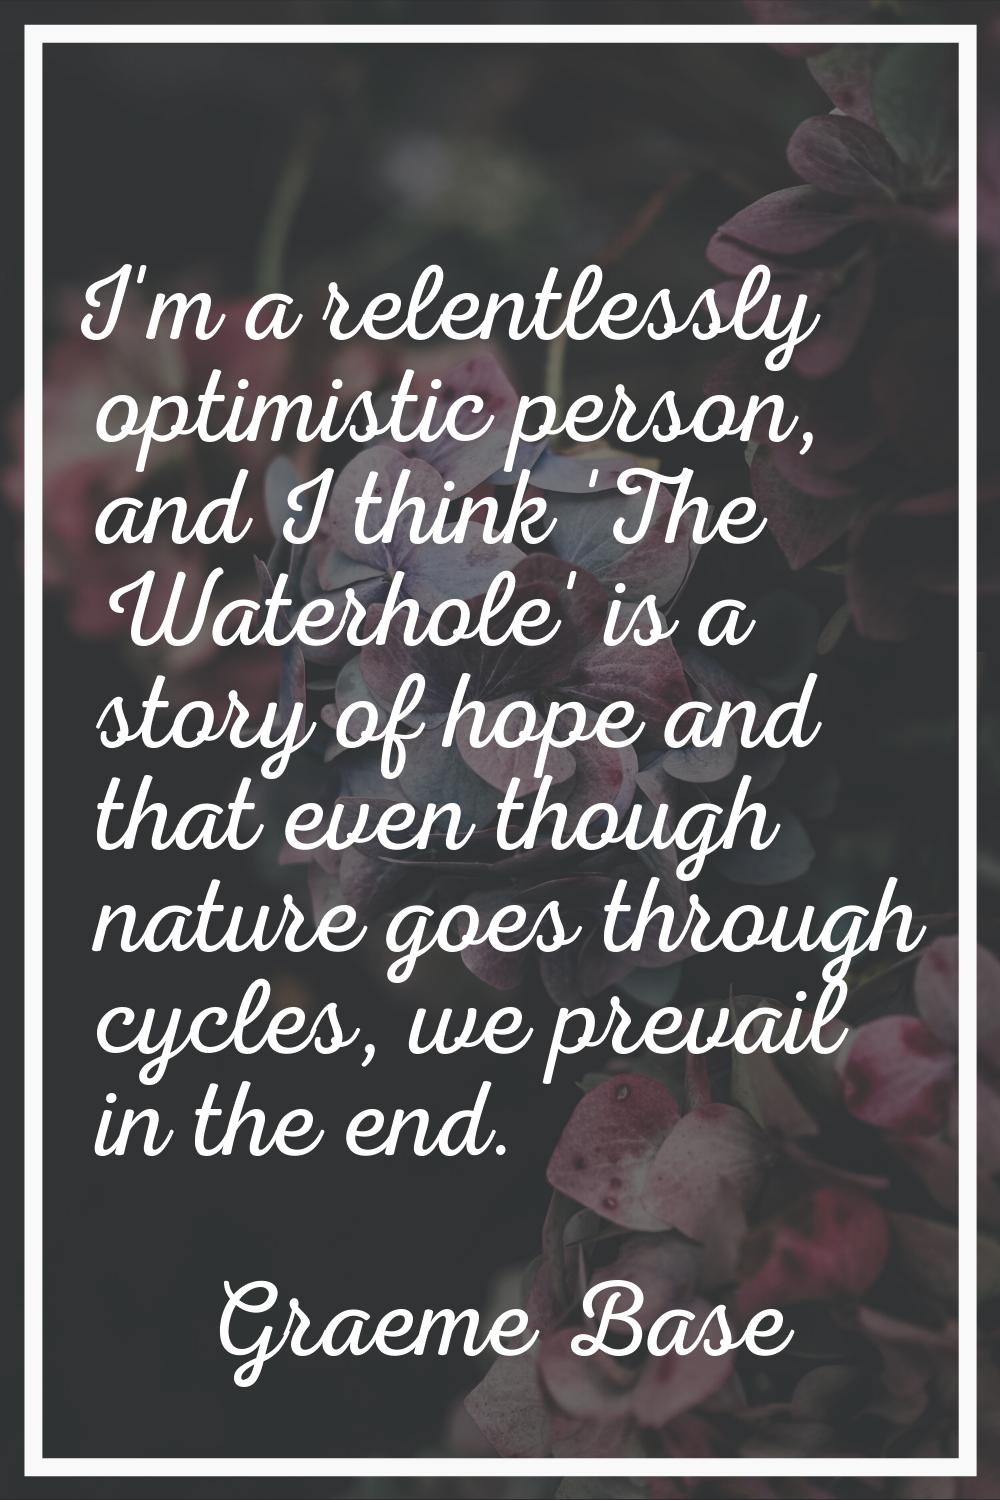 I'm a relentlessly optimistic person, and I think 'The Waterhole' is a story of hope and that even 